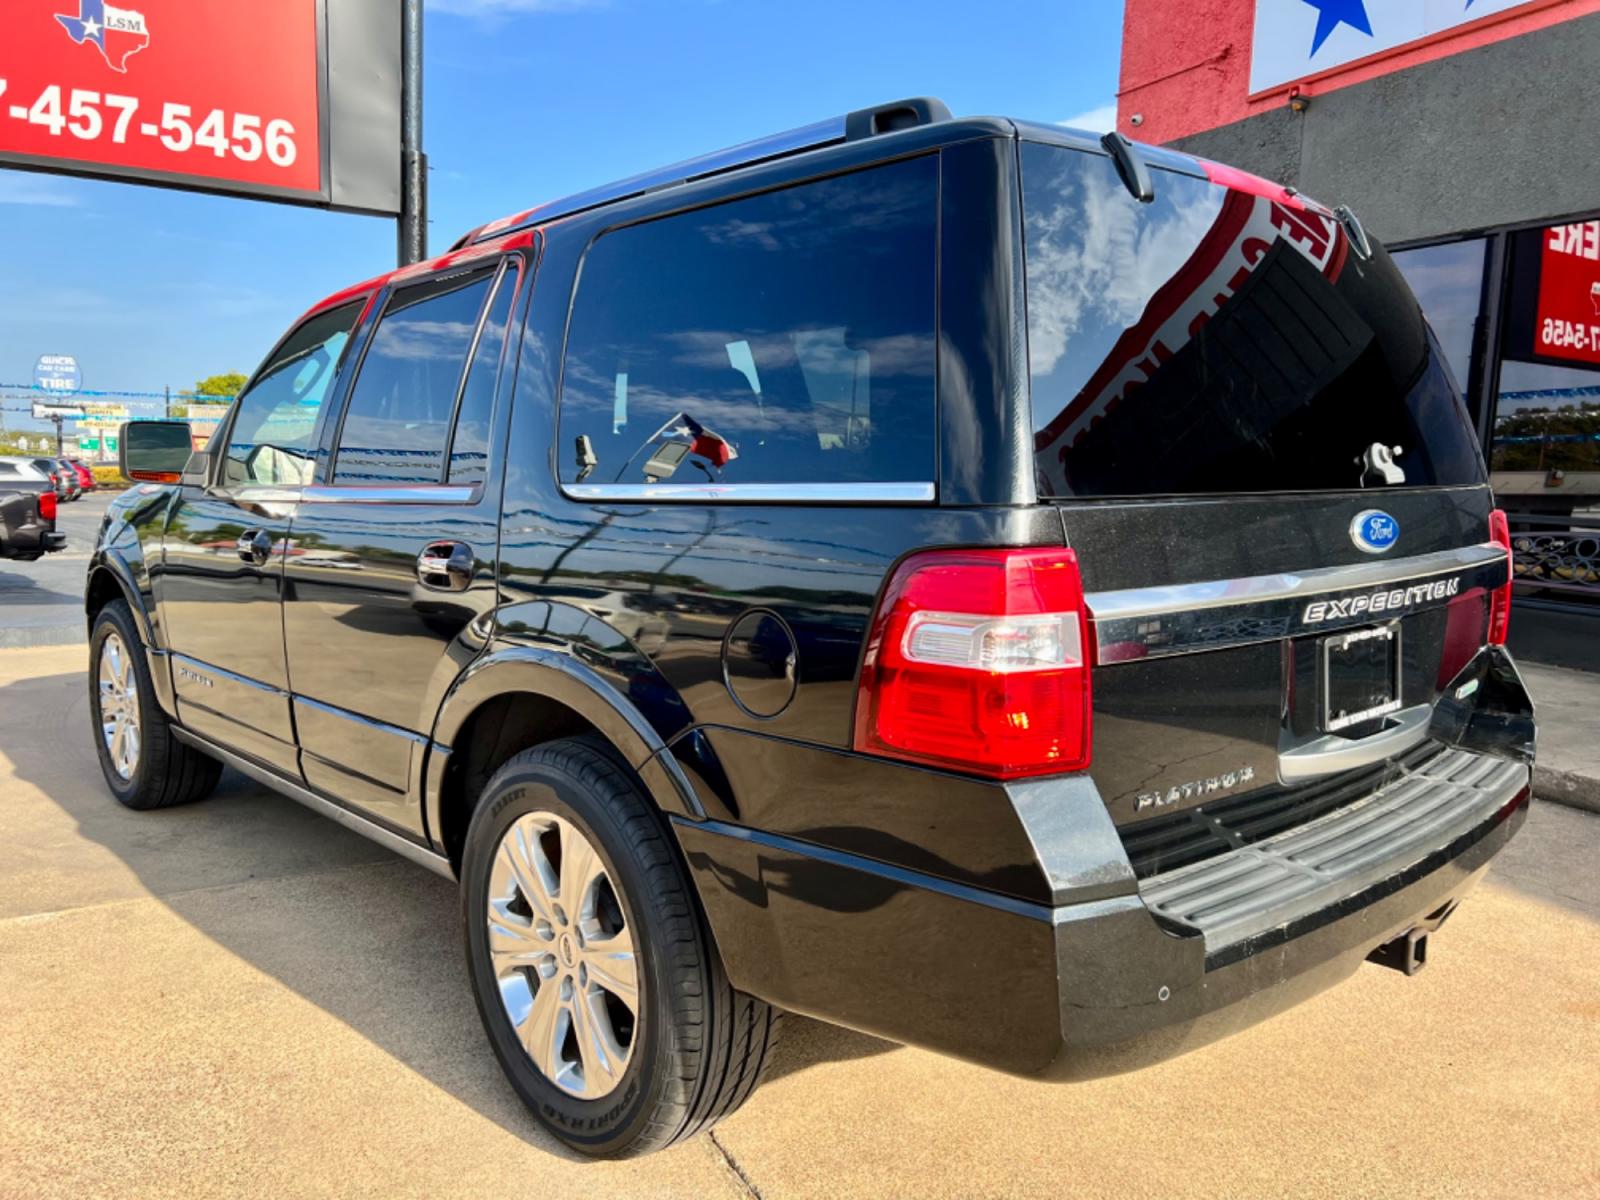 2015 BLACK FORD EXPEDITION (1FMJU1LTXFE) , located at 5900 E. Lancaster Ave., Fort Worth, TX, 76112, (817) 457-5456, 0.000000, 0.000000 - This is a 2015 FORD EXPEDITION 4 DOOR SUV that is in excellent condition. There are no dents or scratches. The interior is clean with no rips or tears or stains. All power windows, door locks and seats. Ice cold AC for those hot Texas summer days. It is equipped with a CD player, AM/FM radio, AUX po - Photo #4